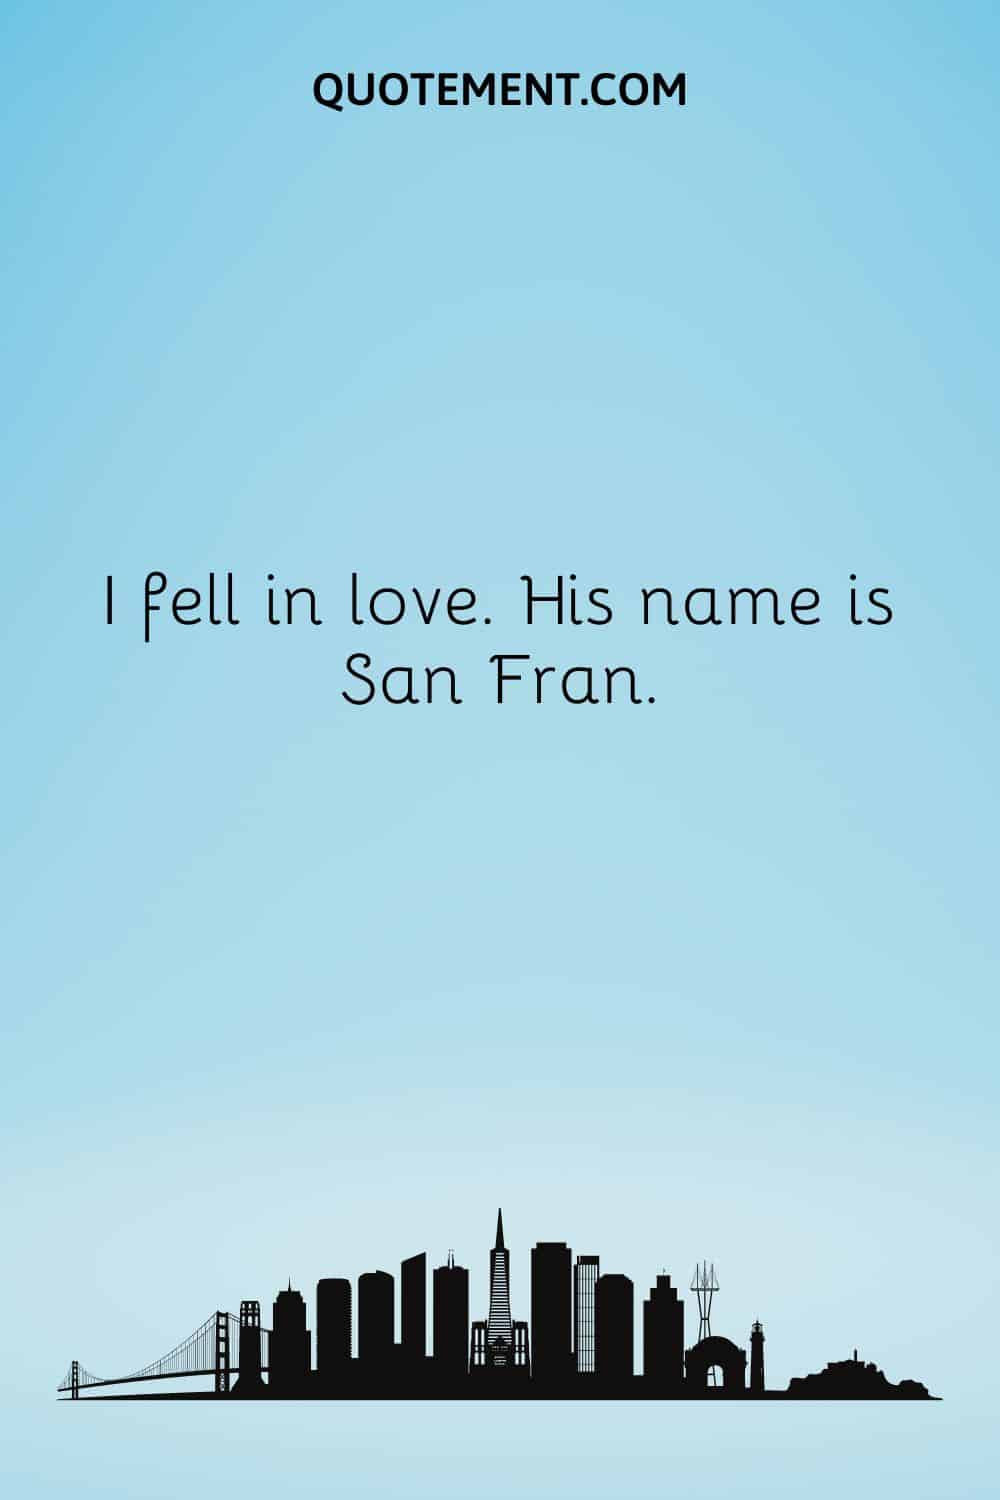 I fell in love. His name is San Fran.